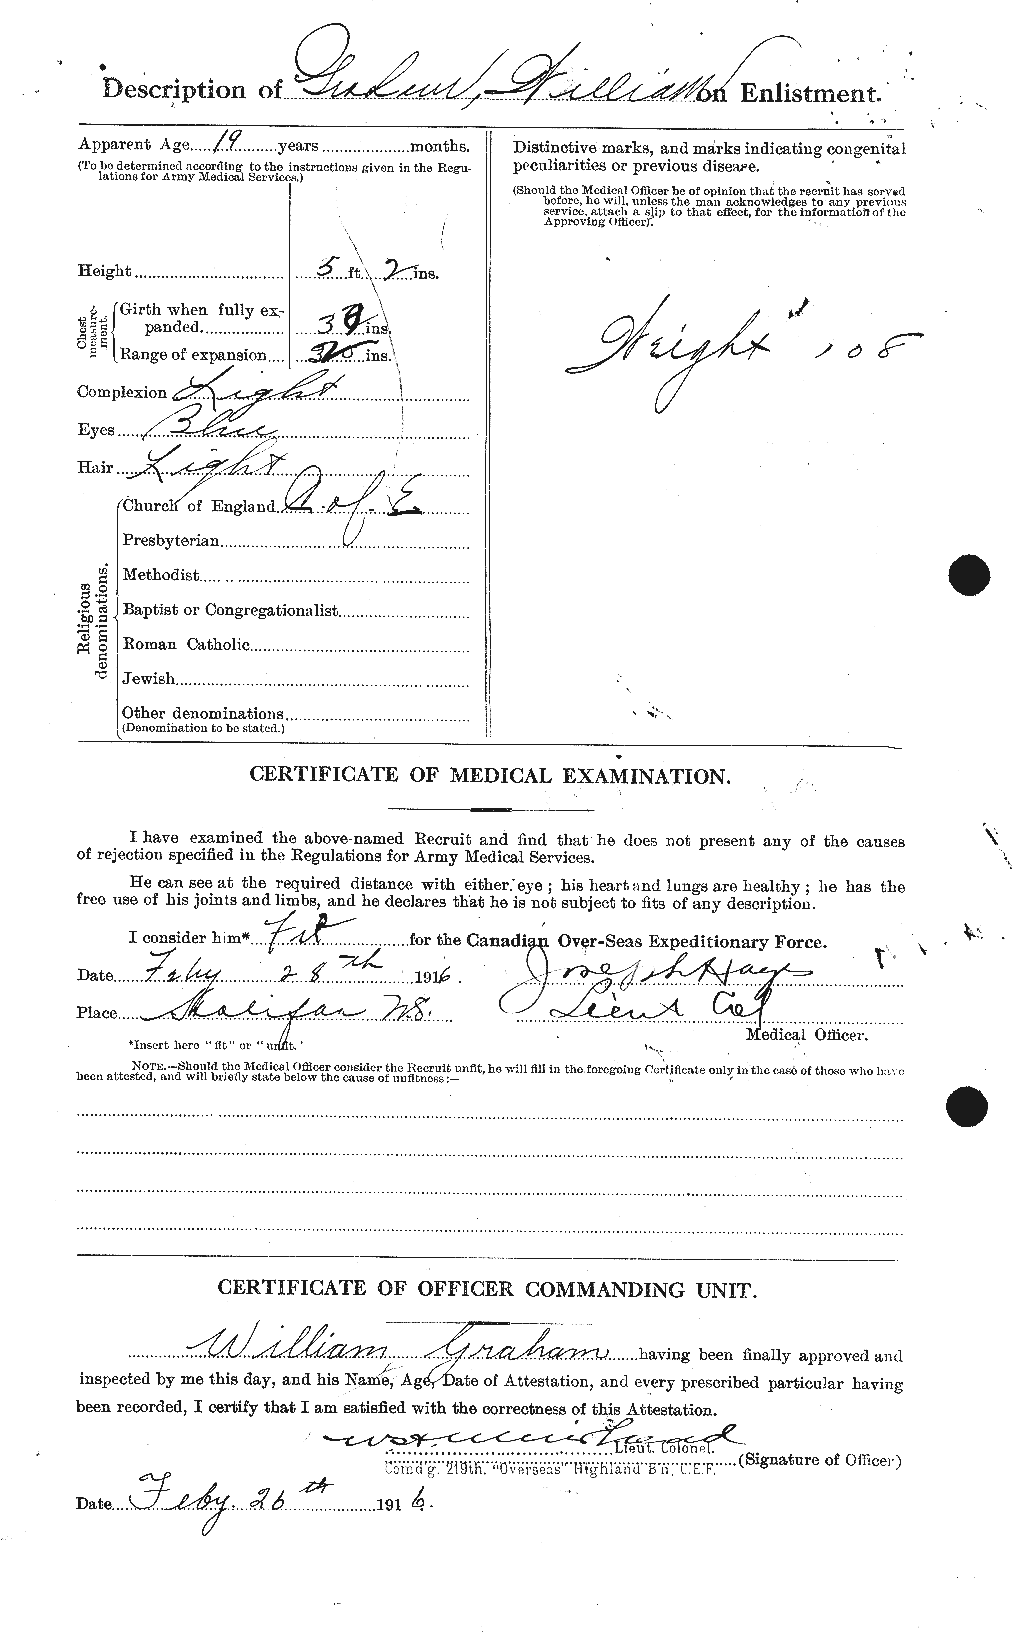 Personnel Records of the First World War - CEF 362714b